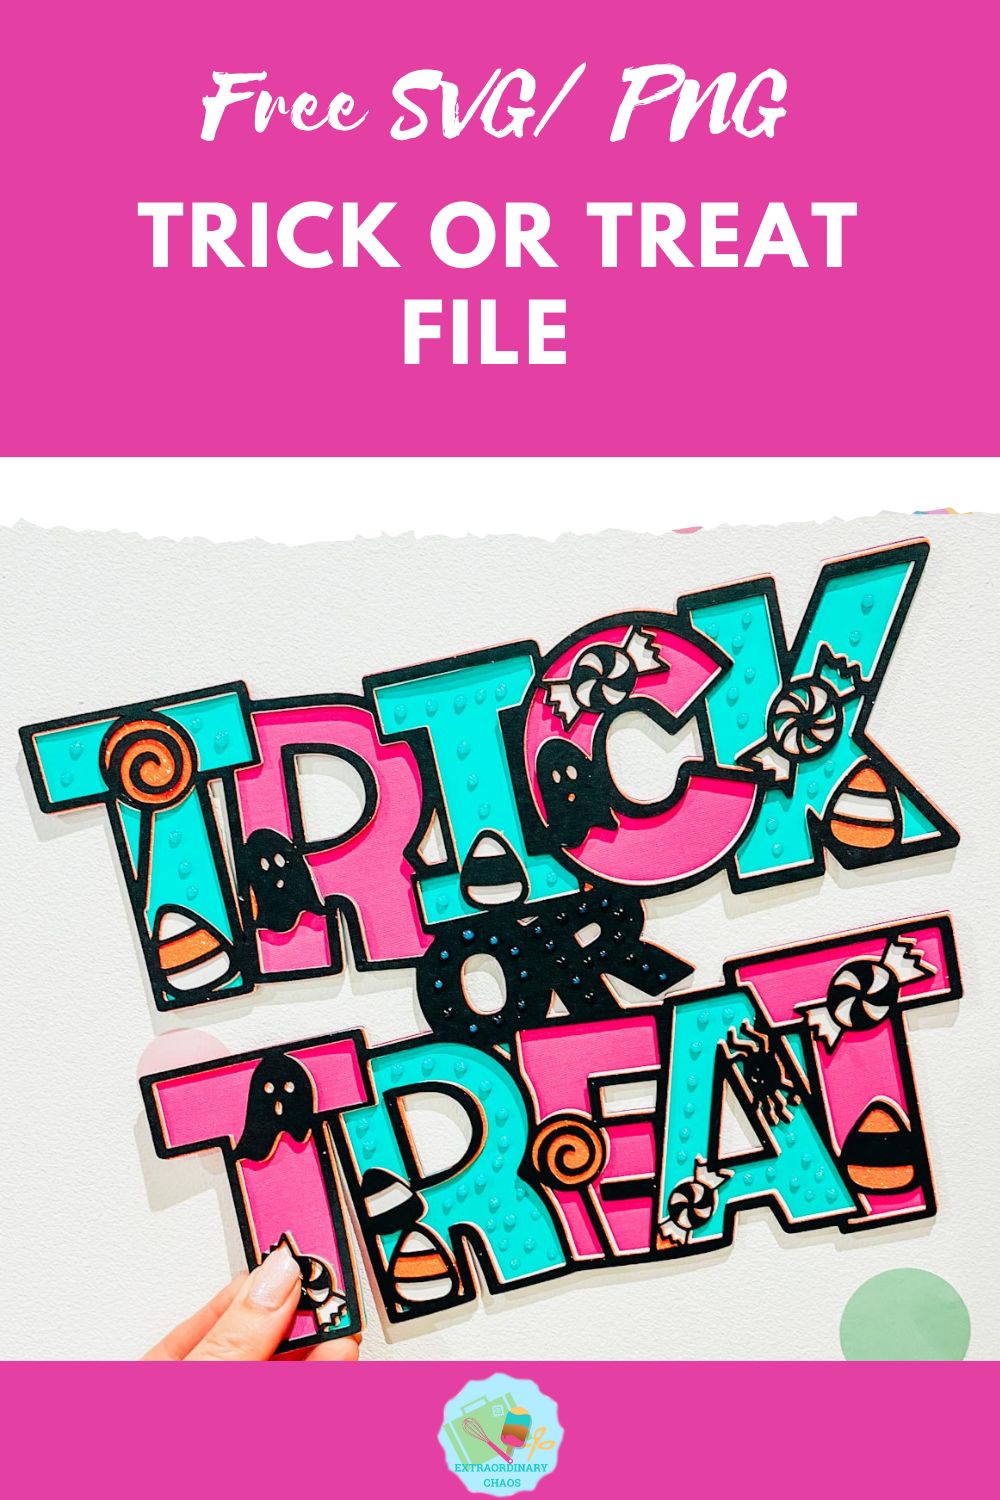 Free Layered Trick Or Treat SVGPNG File for Cricut, Glowforge